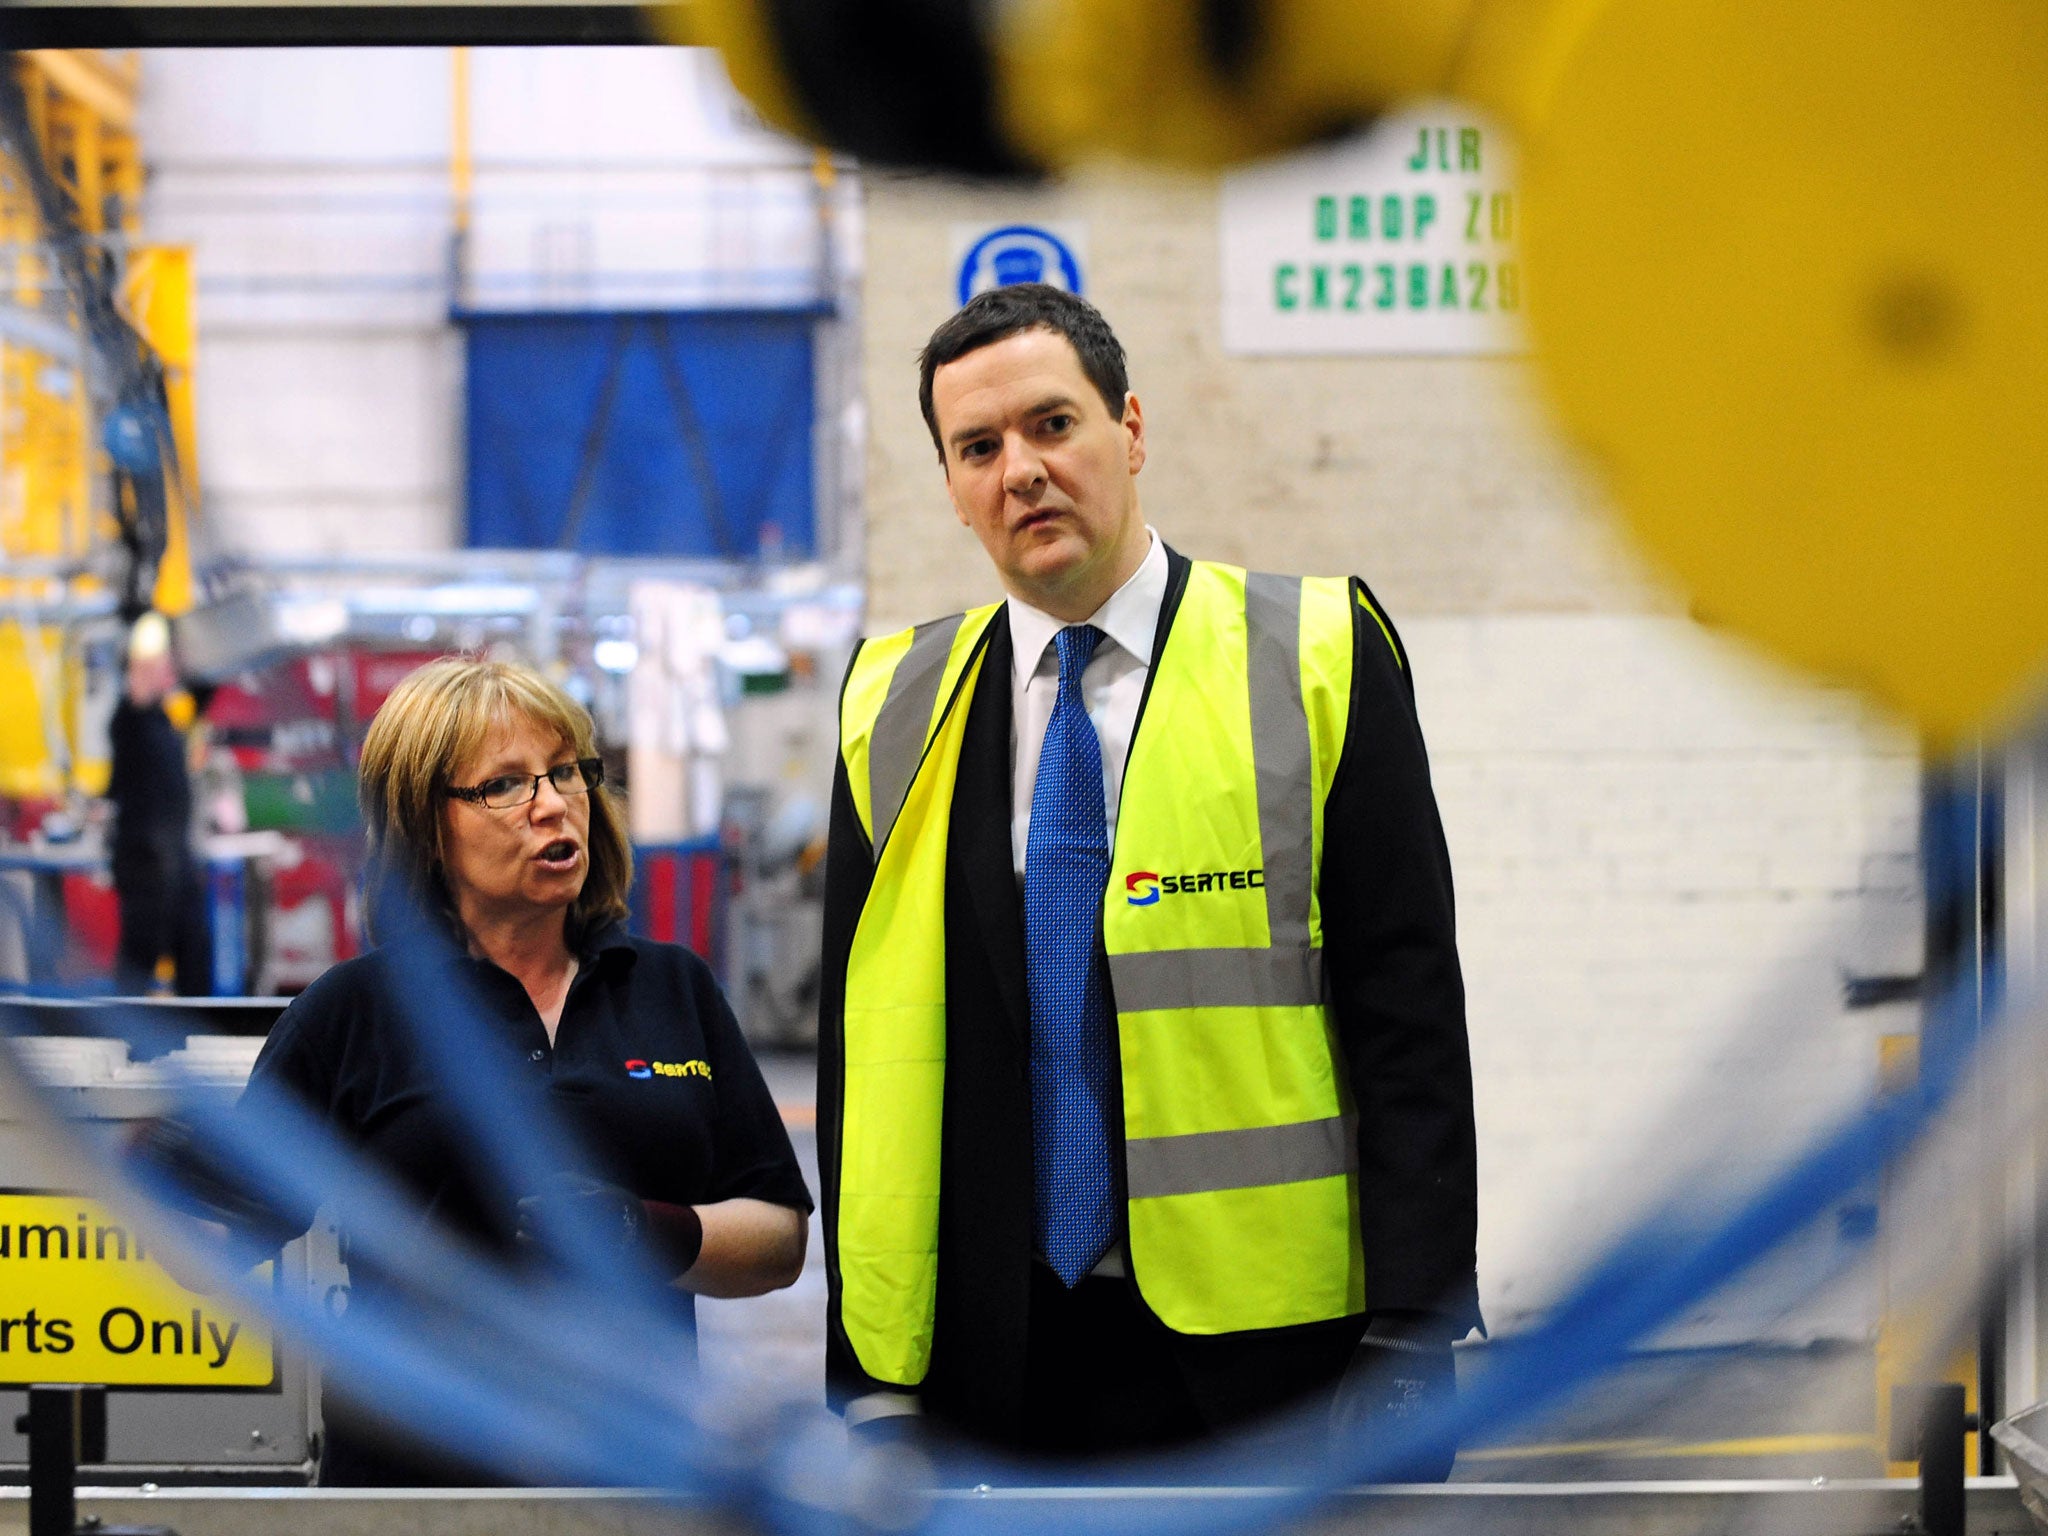 Chancellor George Osborne visits manufacturing company Sertec in Birmingham. The Chancellor has set out plans to cut a further £25 billion from public spending - including £12 billion from benefits 